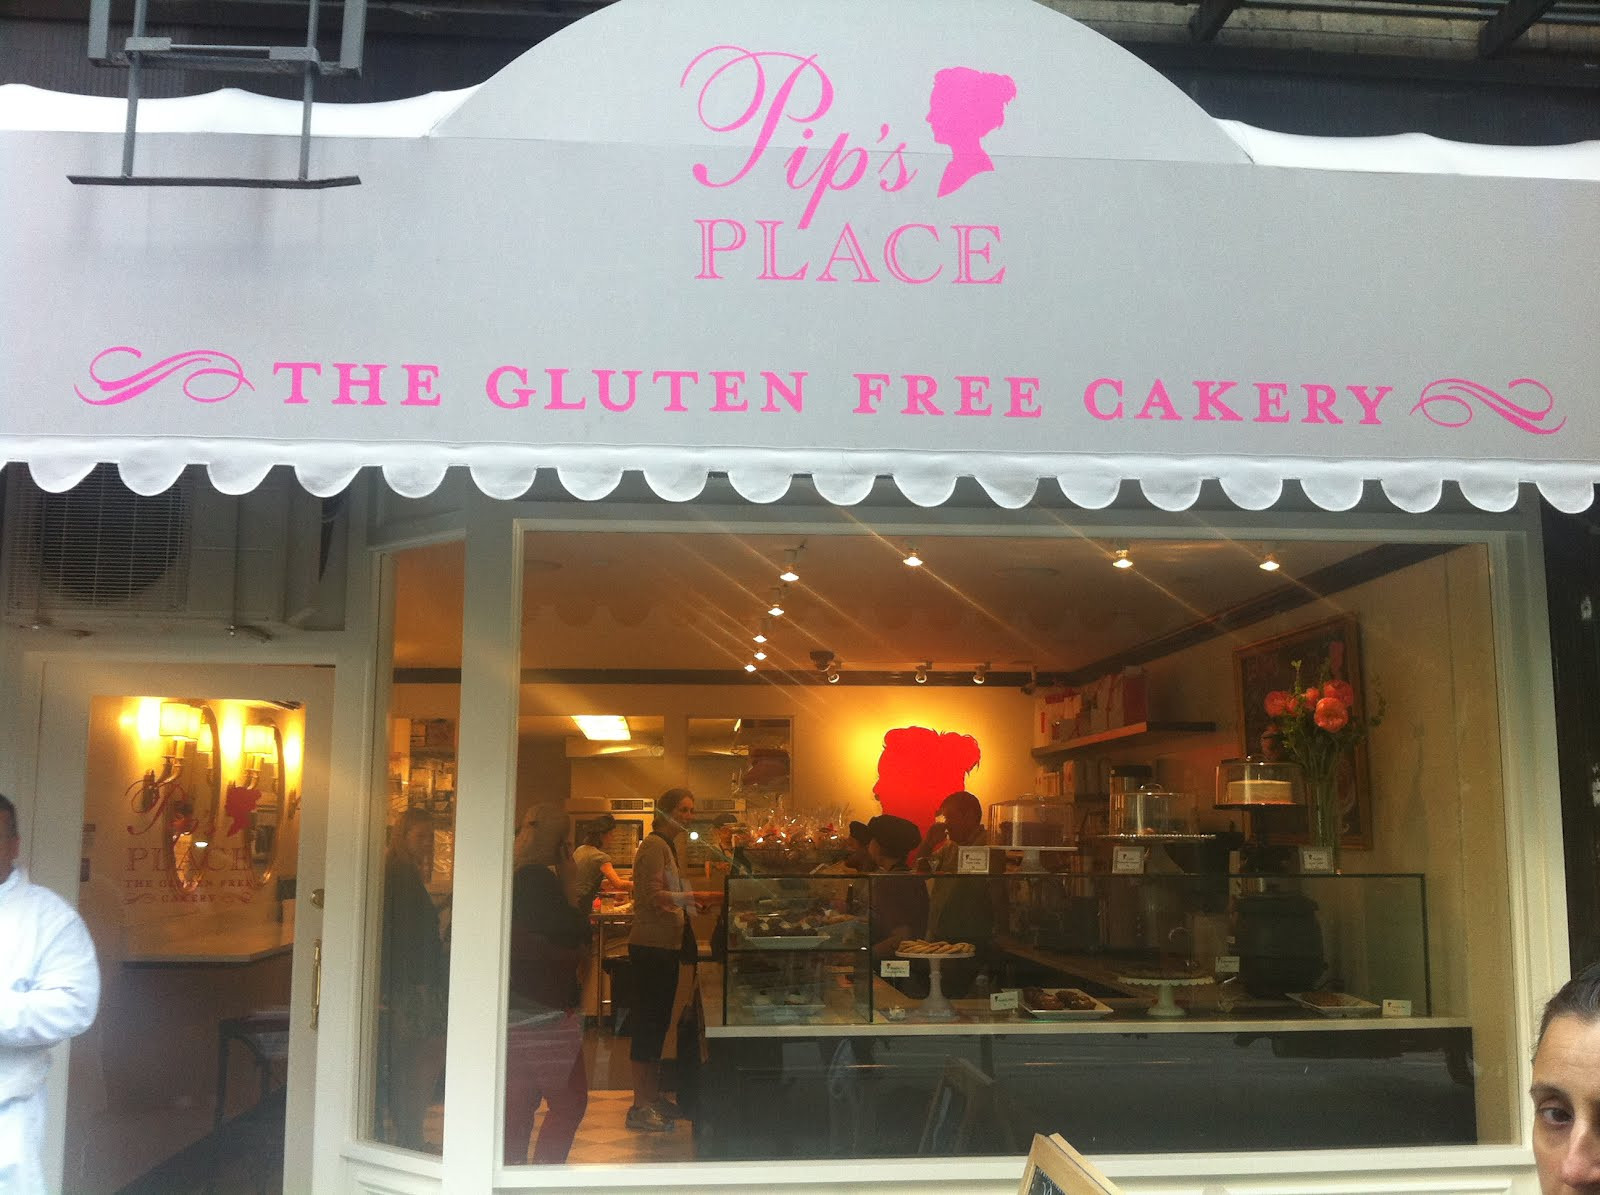 Gluten Free Bread Nyc
 Our Gluten Free Family Pip s Place A Gluten Free Bakery